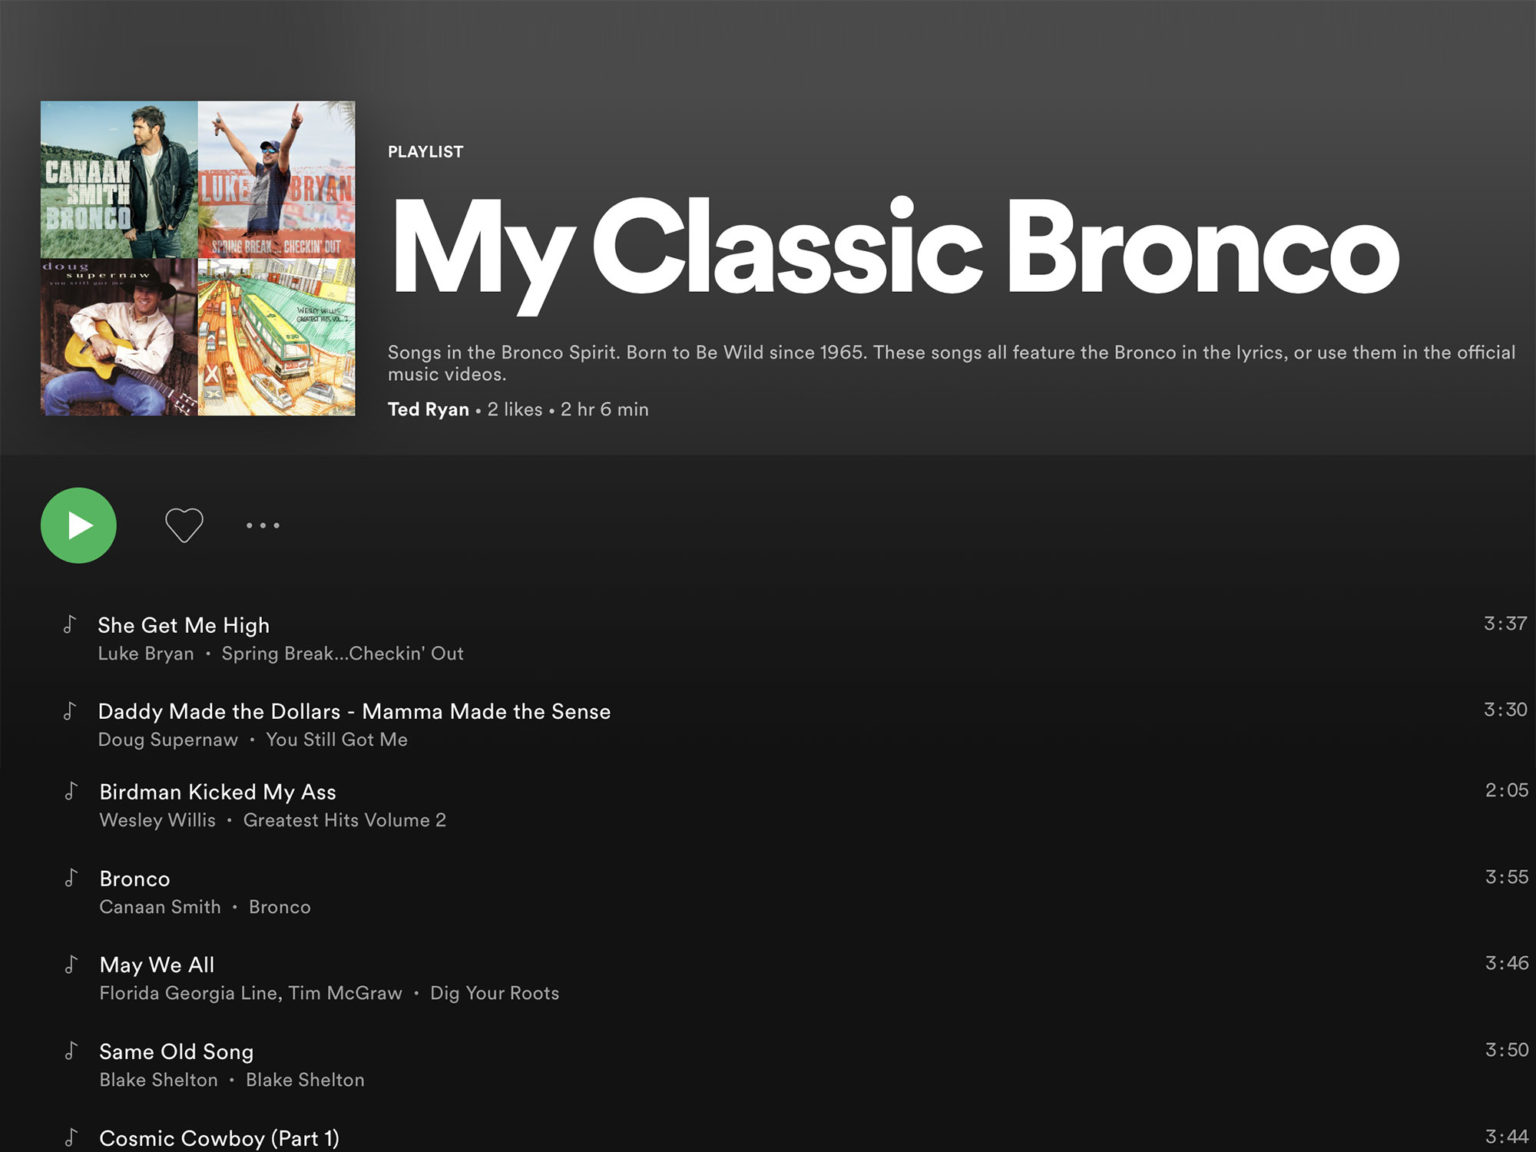 Ford has created a playlist specifically for Bronco enthusiasts.